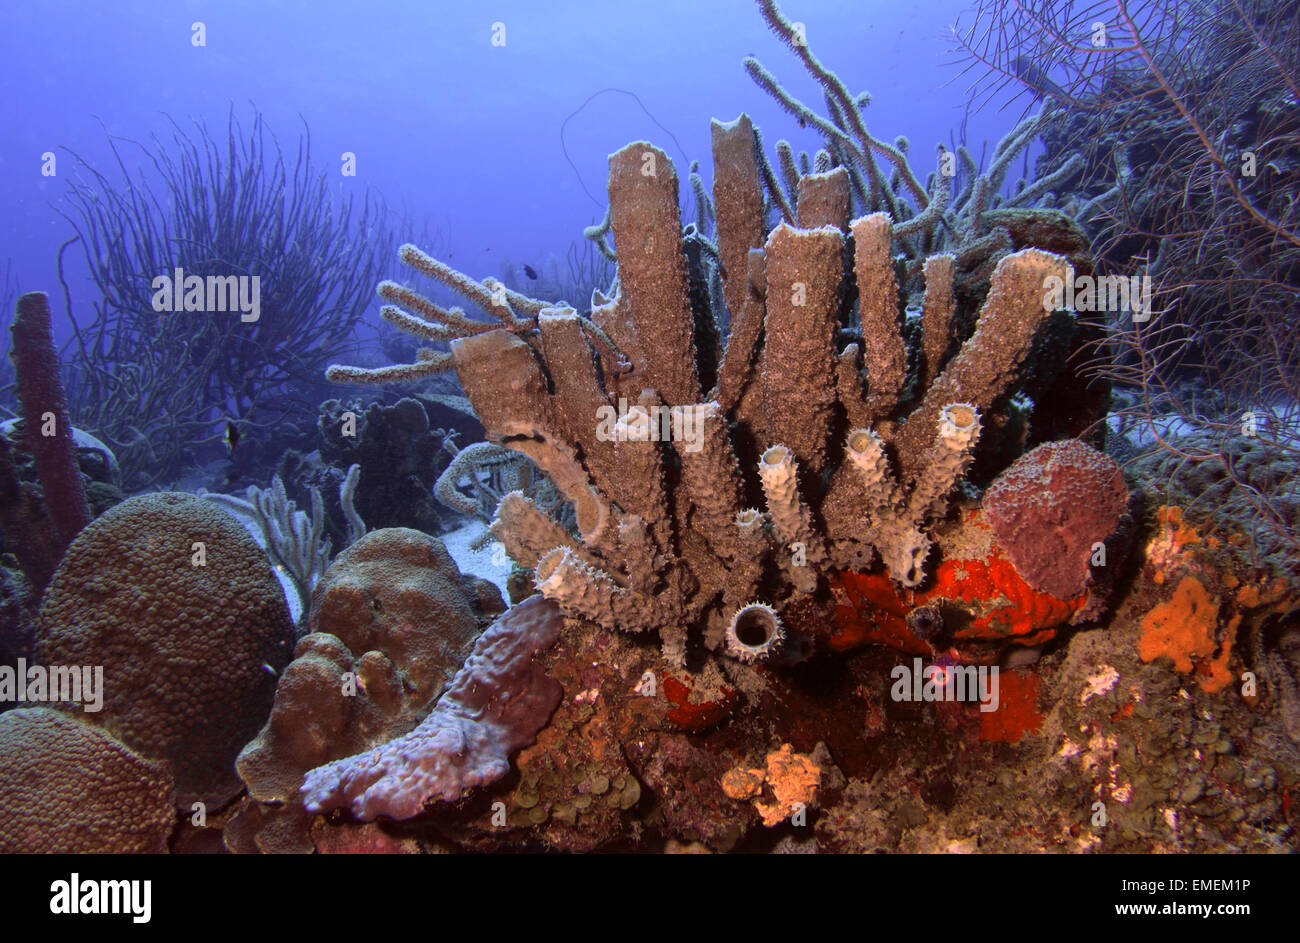 A patch of beautiful reef including corals and sponge's along the reefs of Curacao, Caribbean Stock Photo